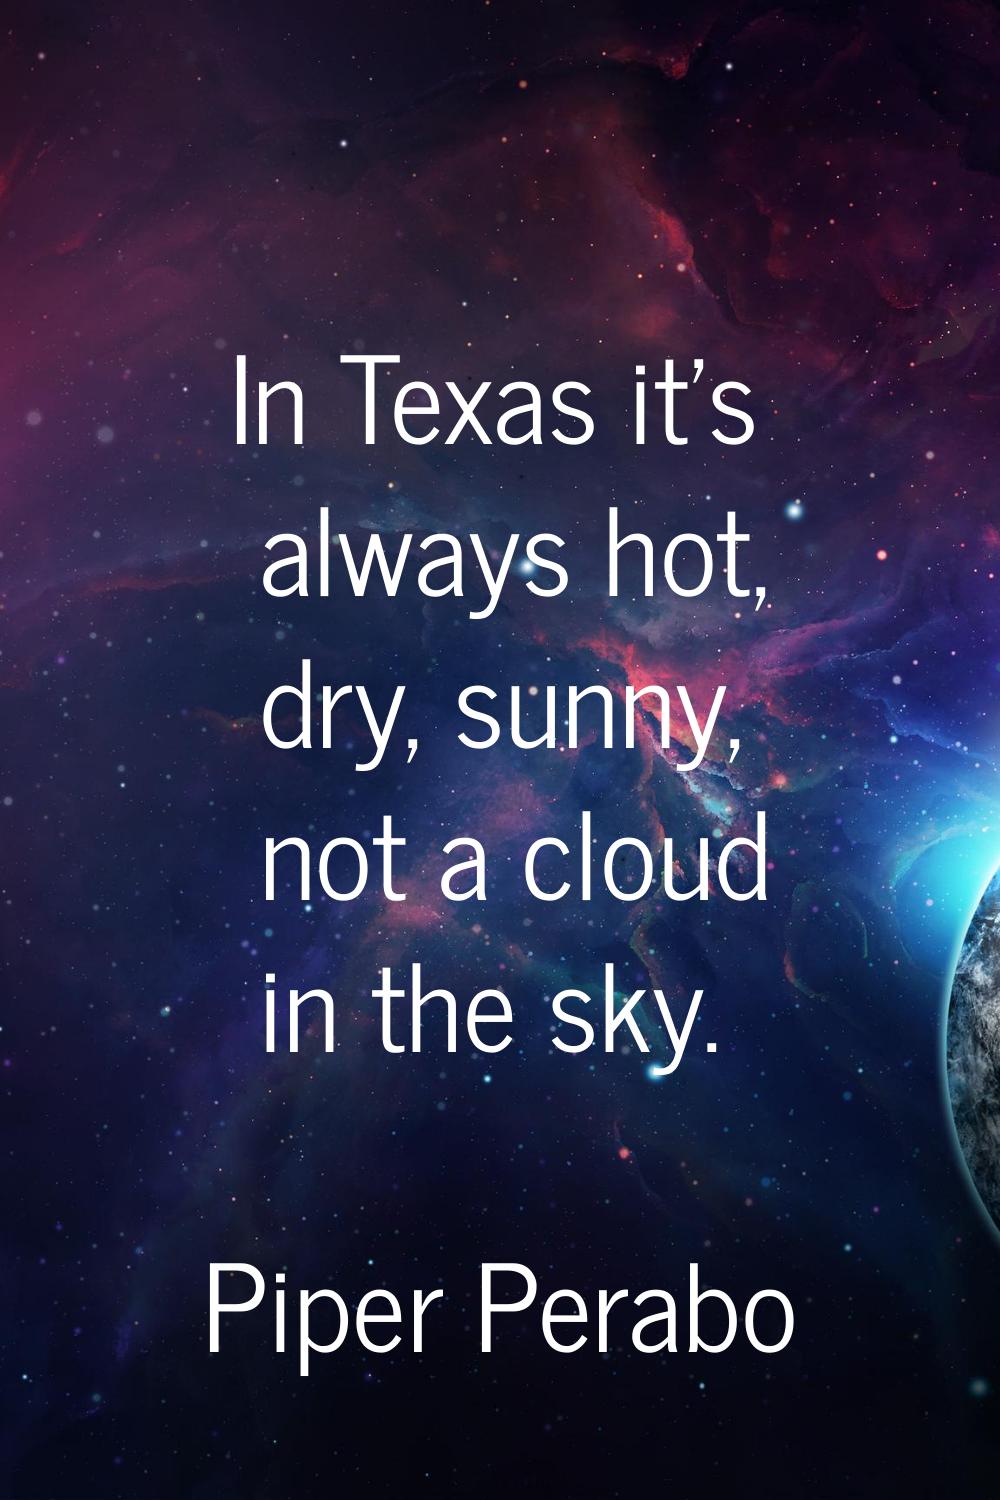 In Texas it's always hot, dry, sunny, not a cloud in the sky.